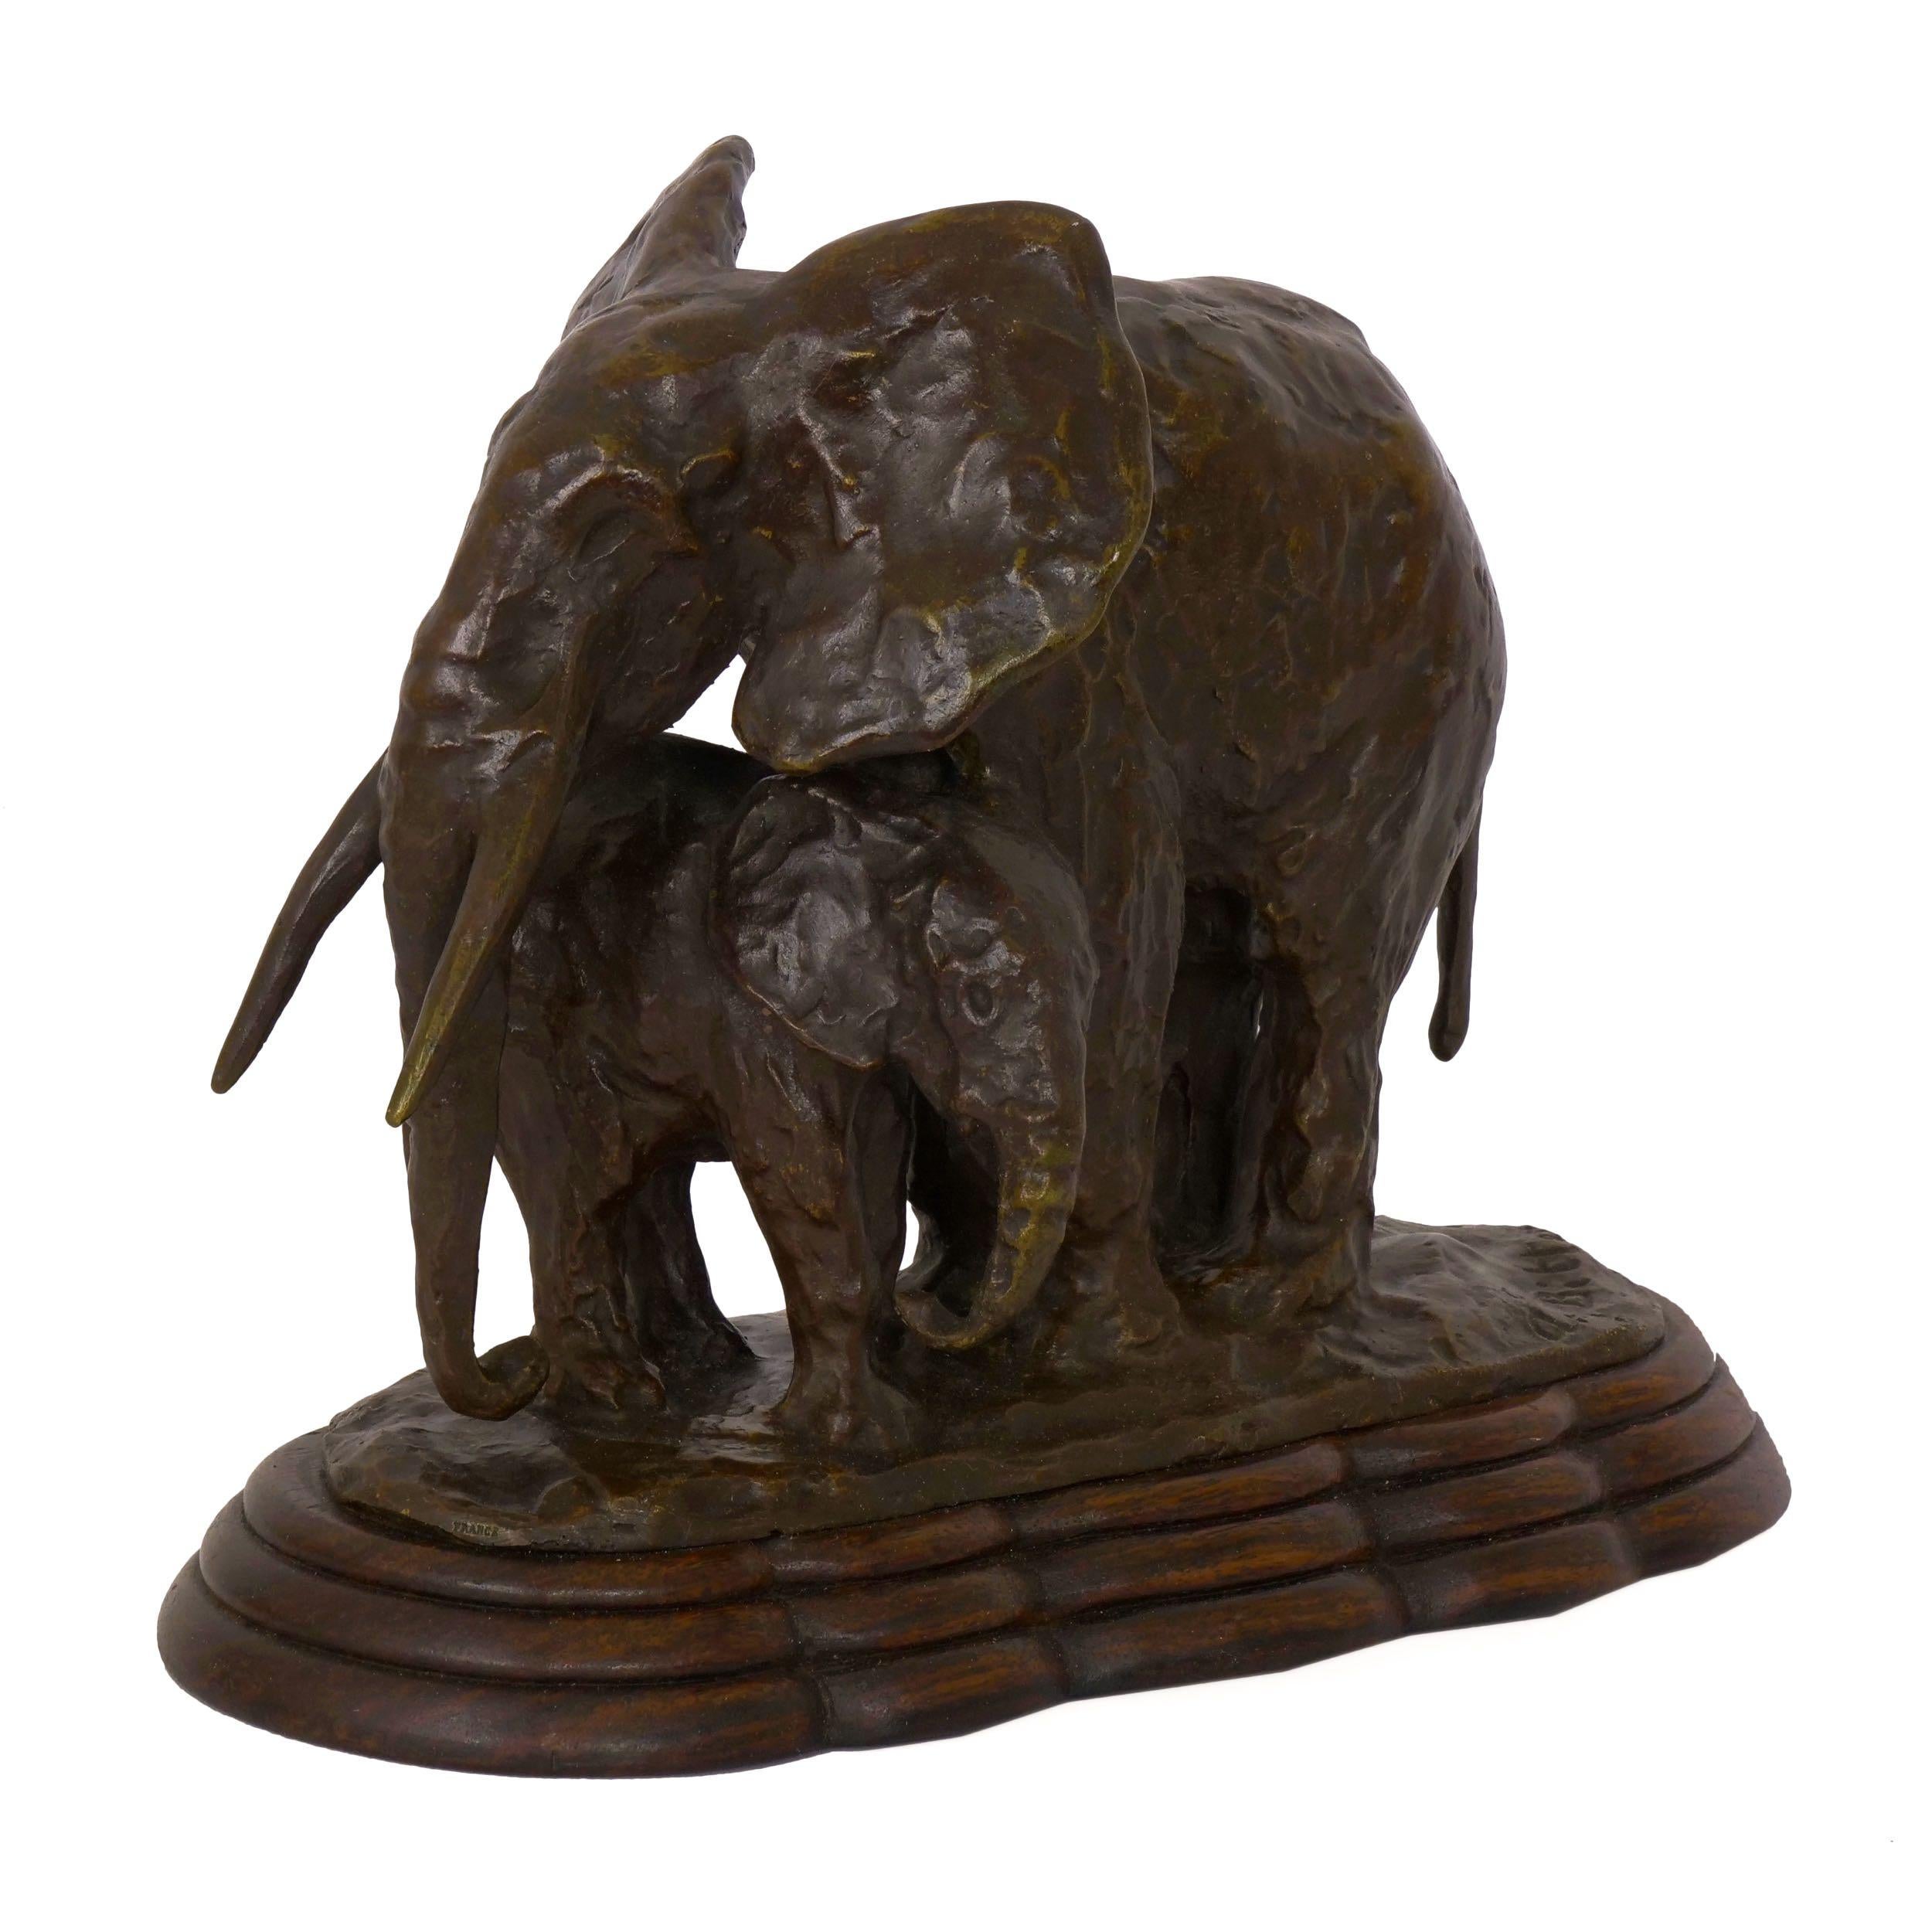 A rich and sensitive work, this fine sculpture beautifully depicts the protective nature of the proud Elephant as she stands over her young. The loose impressionism and rough working of the model is captured in the bronze in a way that leaves us